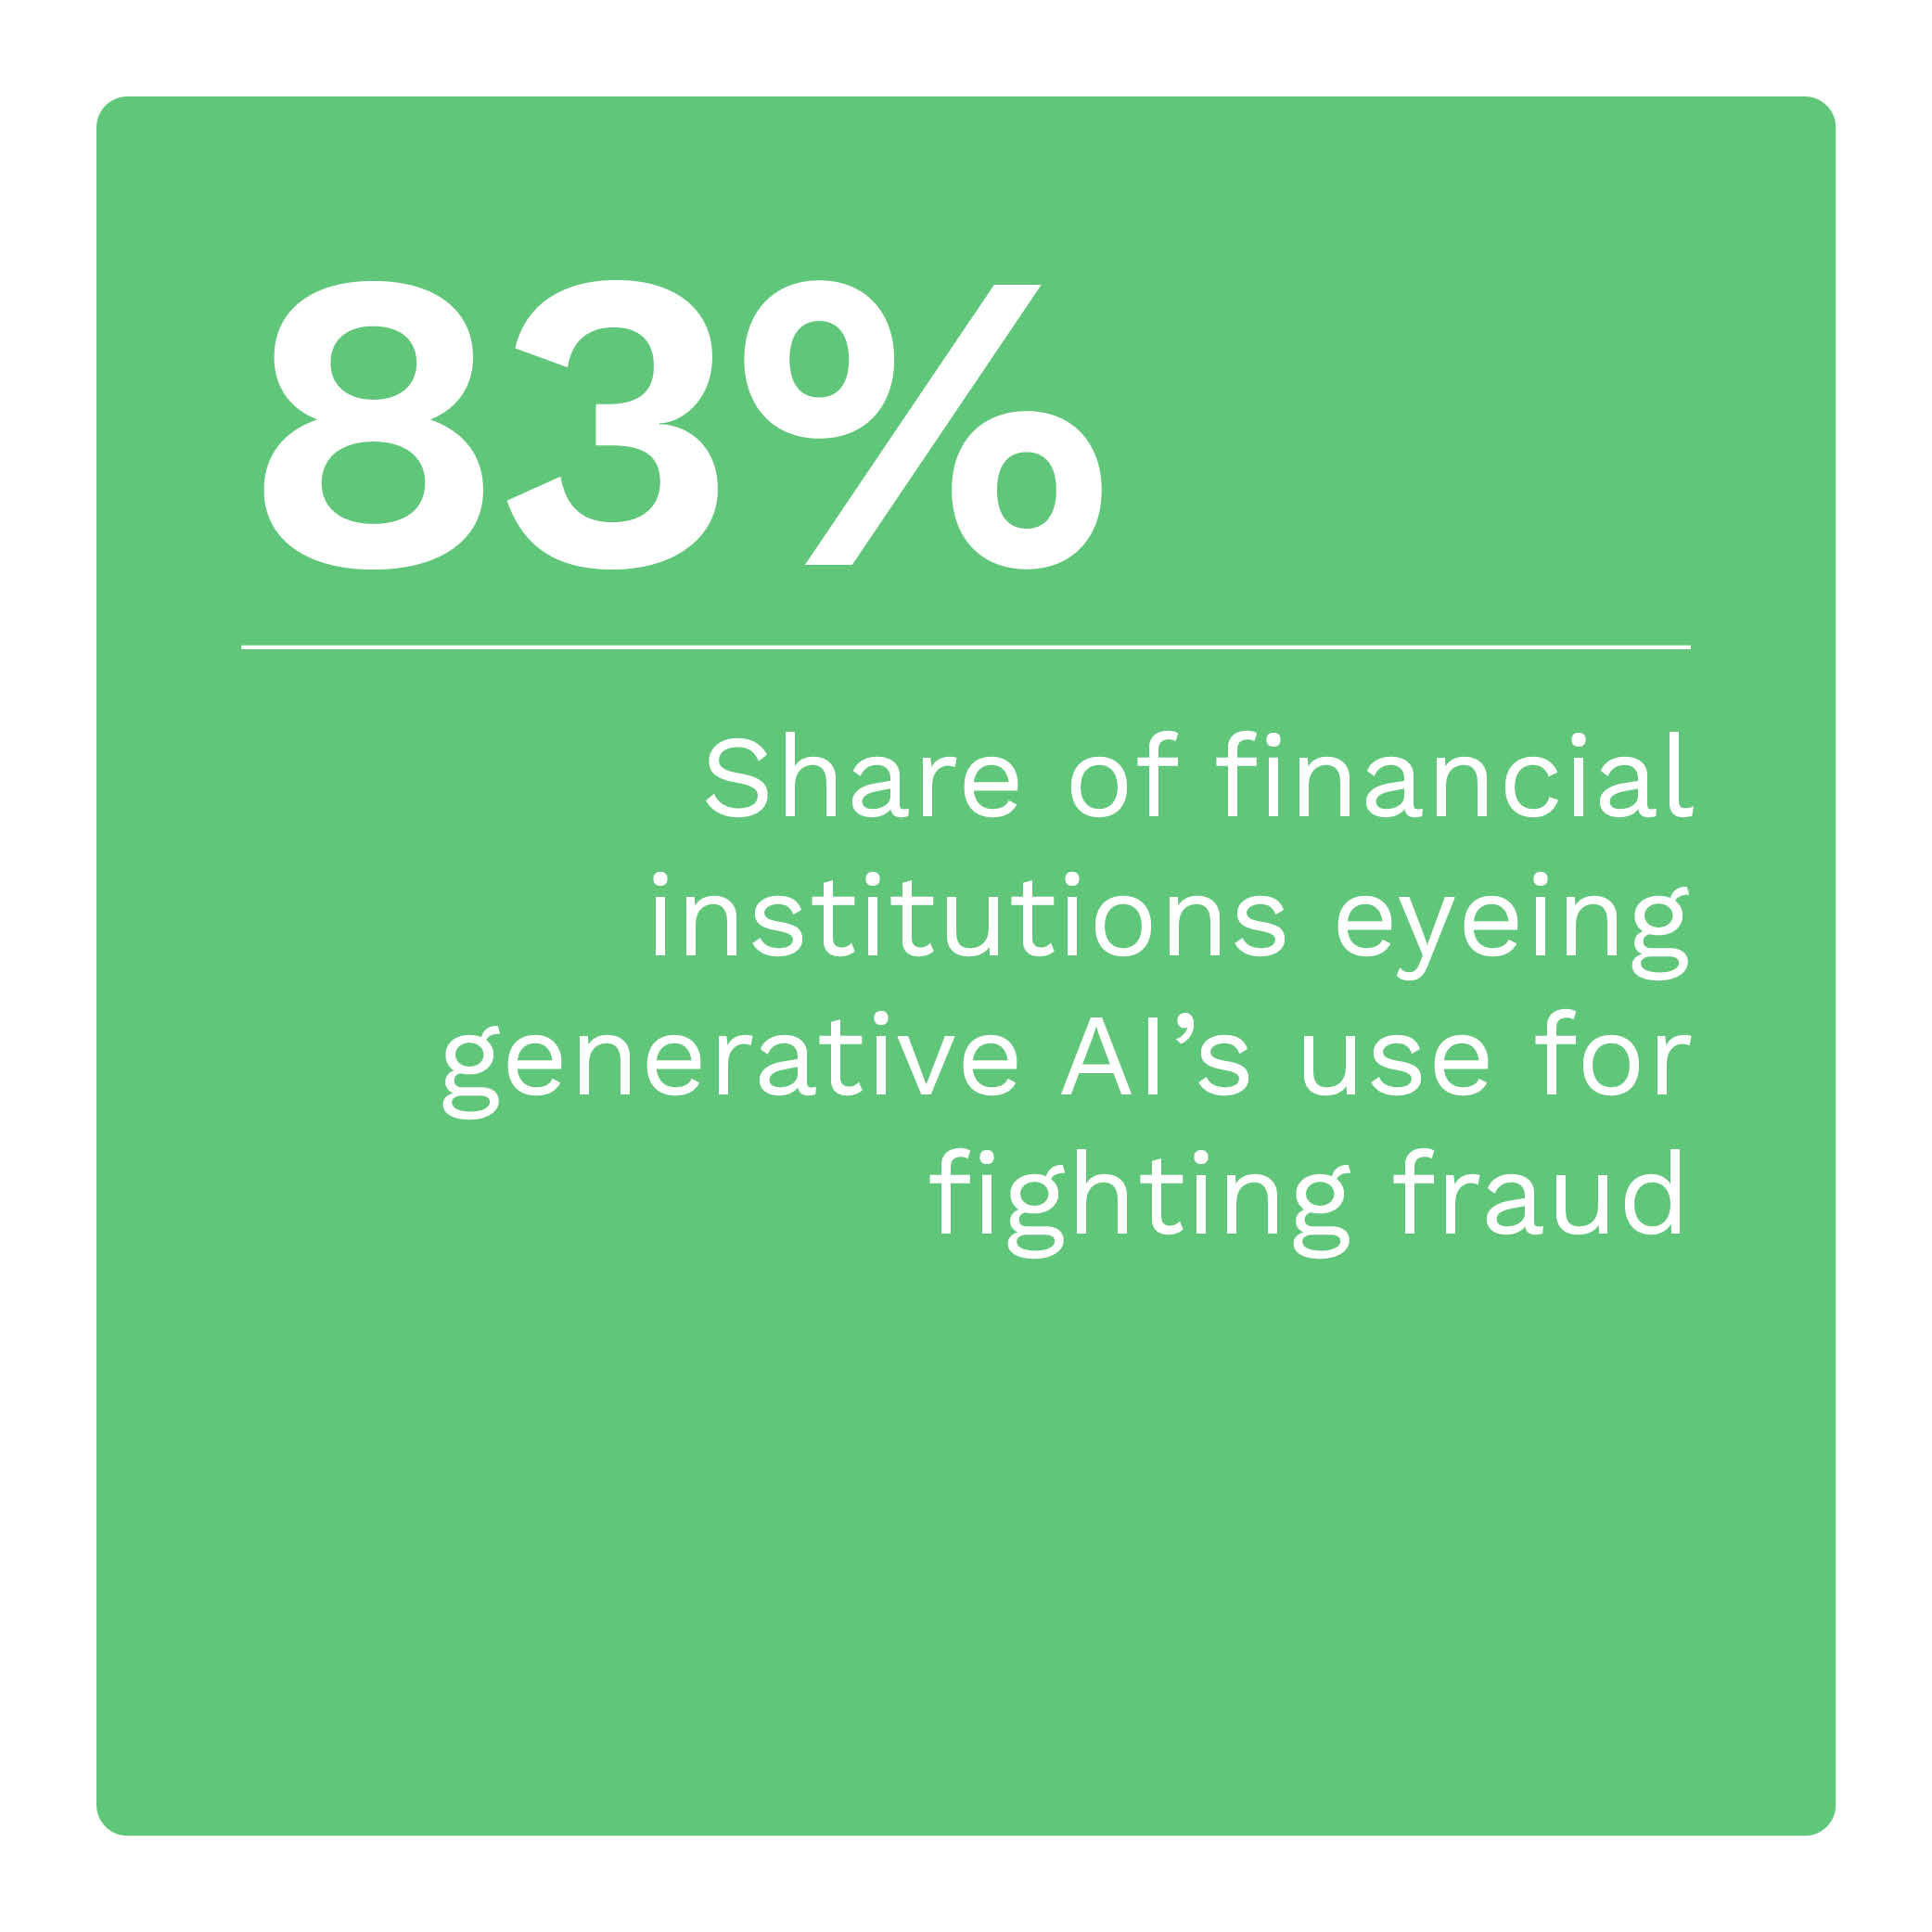 83%: Share of financial institutions eyeing generative AI’s use for fighting fraud